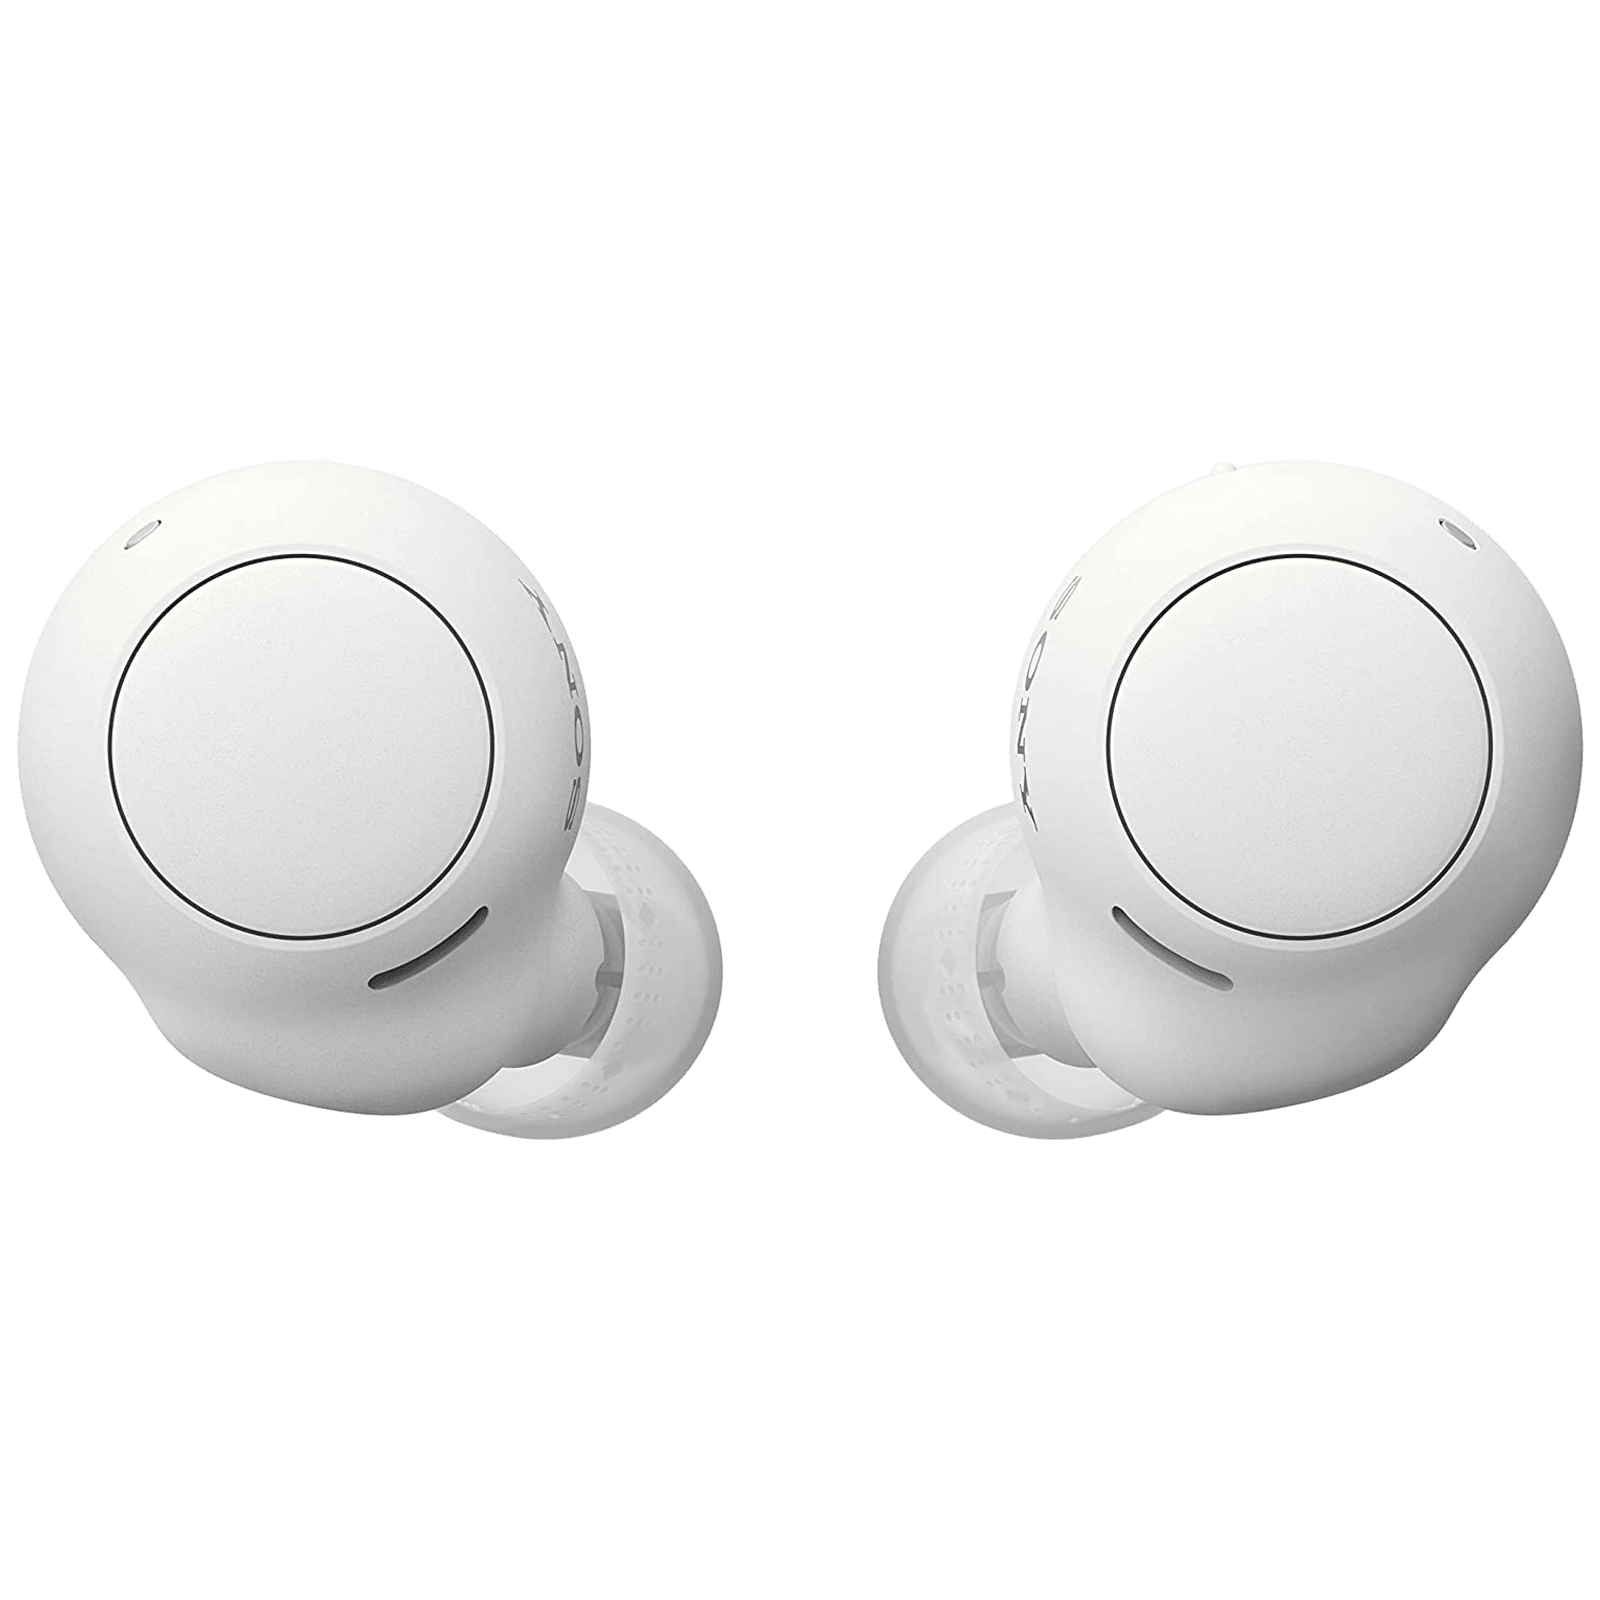 Sony In-Ear Truly Wireless Earbuds with Mic